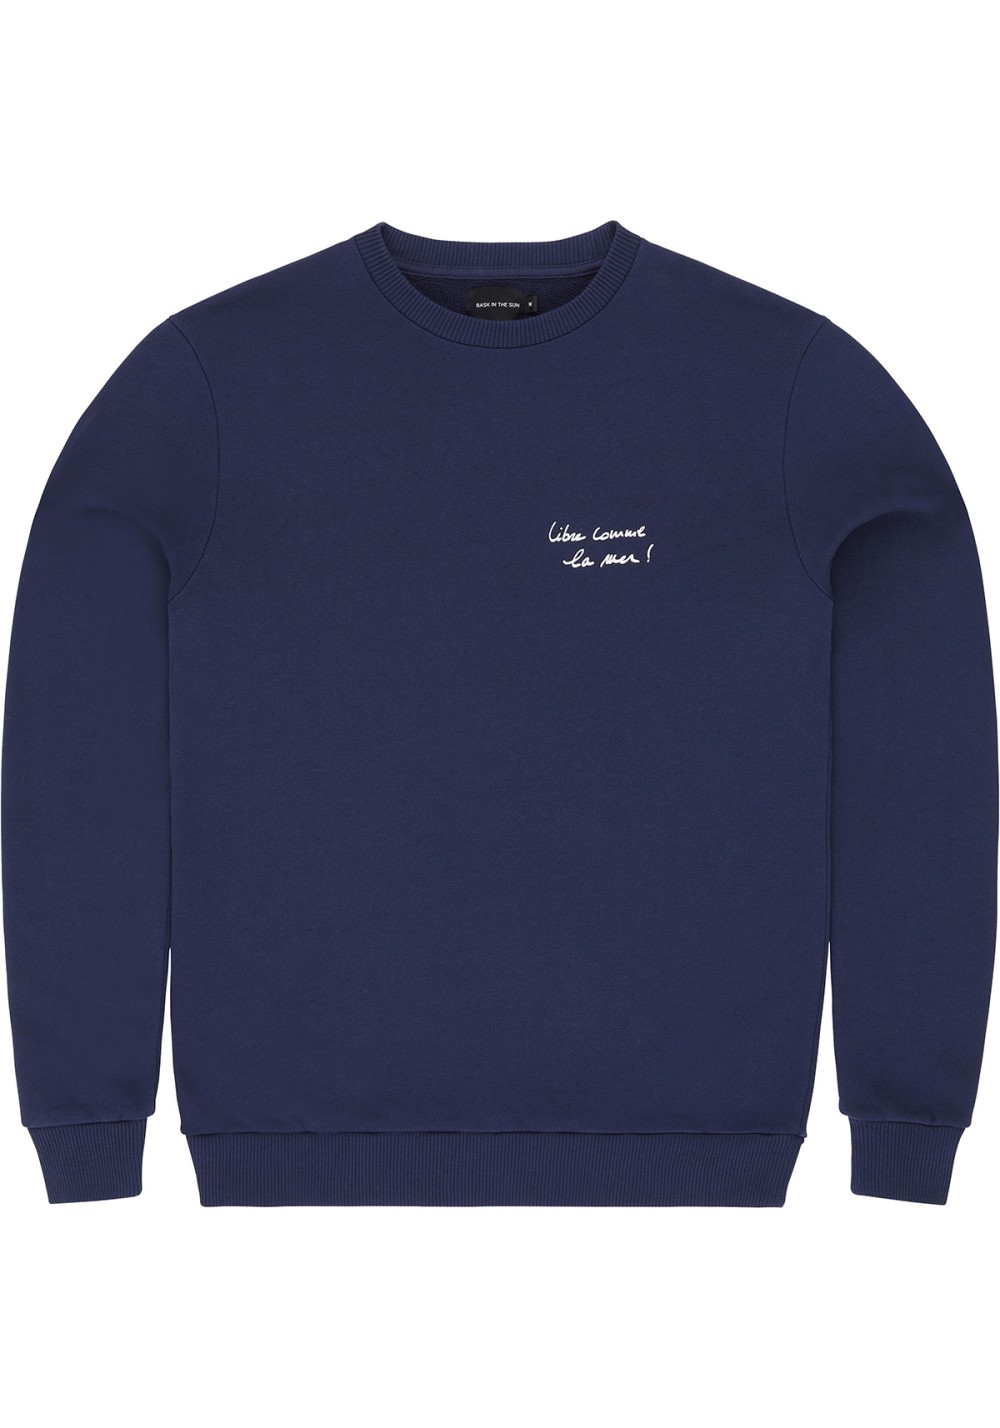 Bask in the Sun - Sweater Freedom Navy